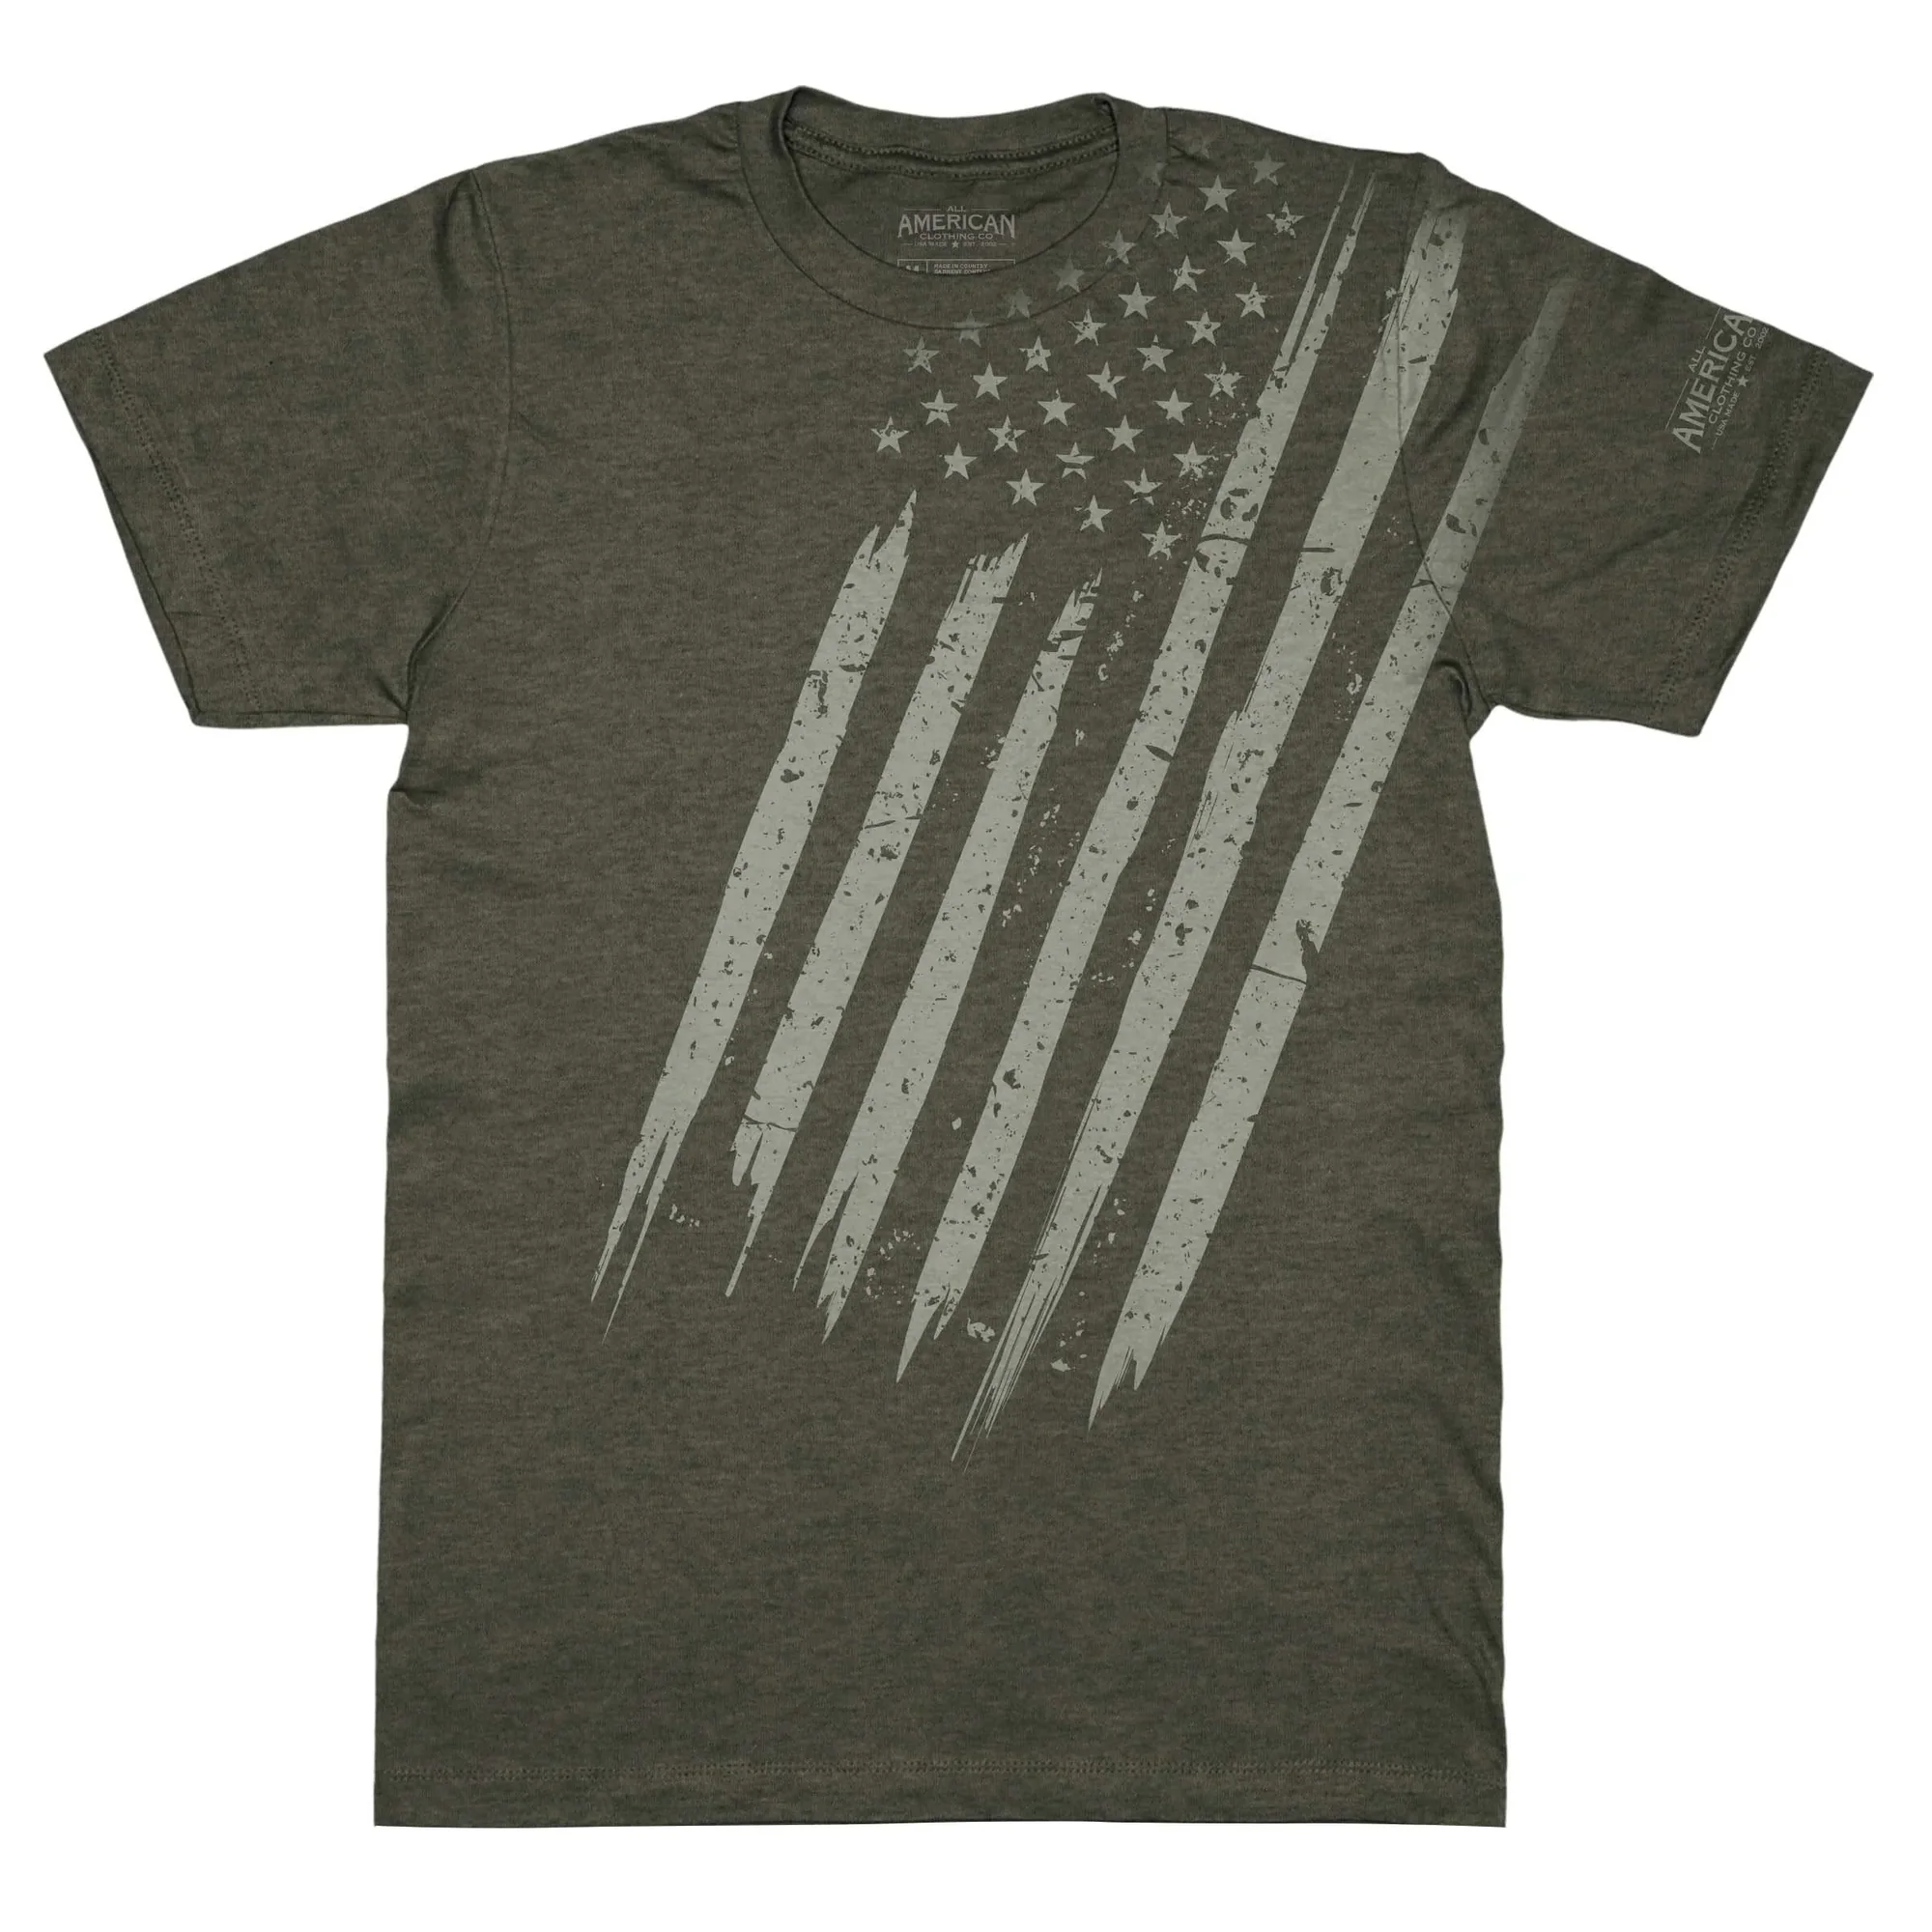 All American Clothing Co. Men's Distressed Shoulder Flag T-Shirt